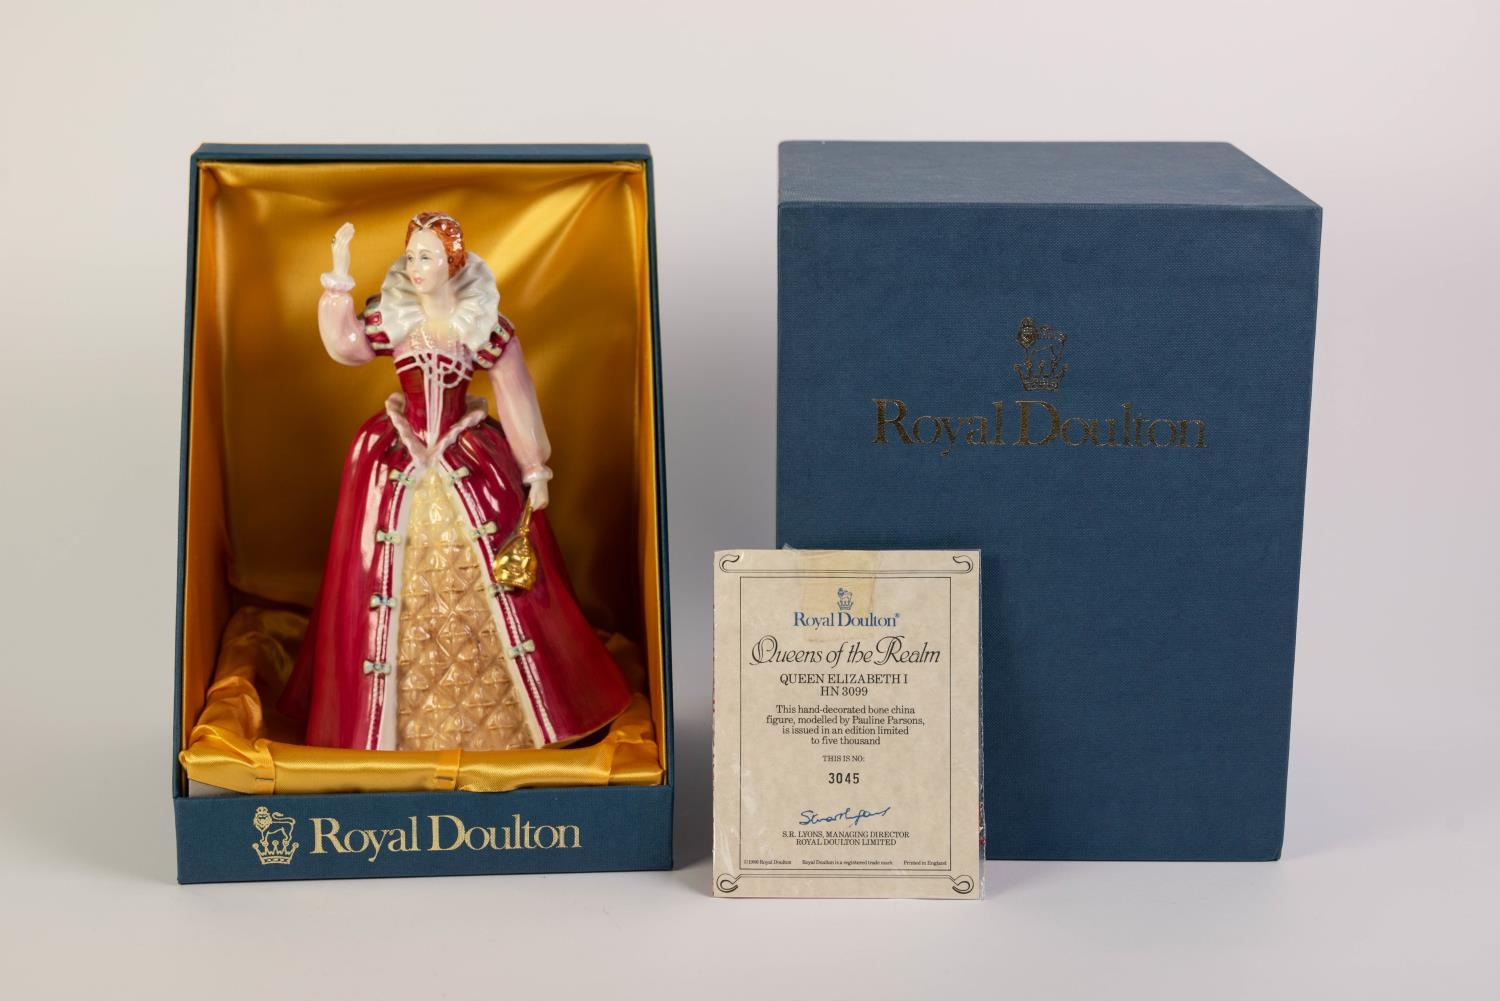 ROYAL DOULTON LIMITED EDITION QUEENS OF THE REALM CHINA FIGURE, ?QUEEN ELIZABETH I?, HN3099, with - Image 4 of 4